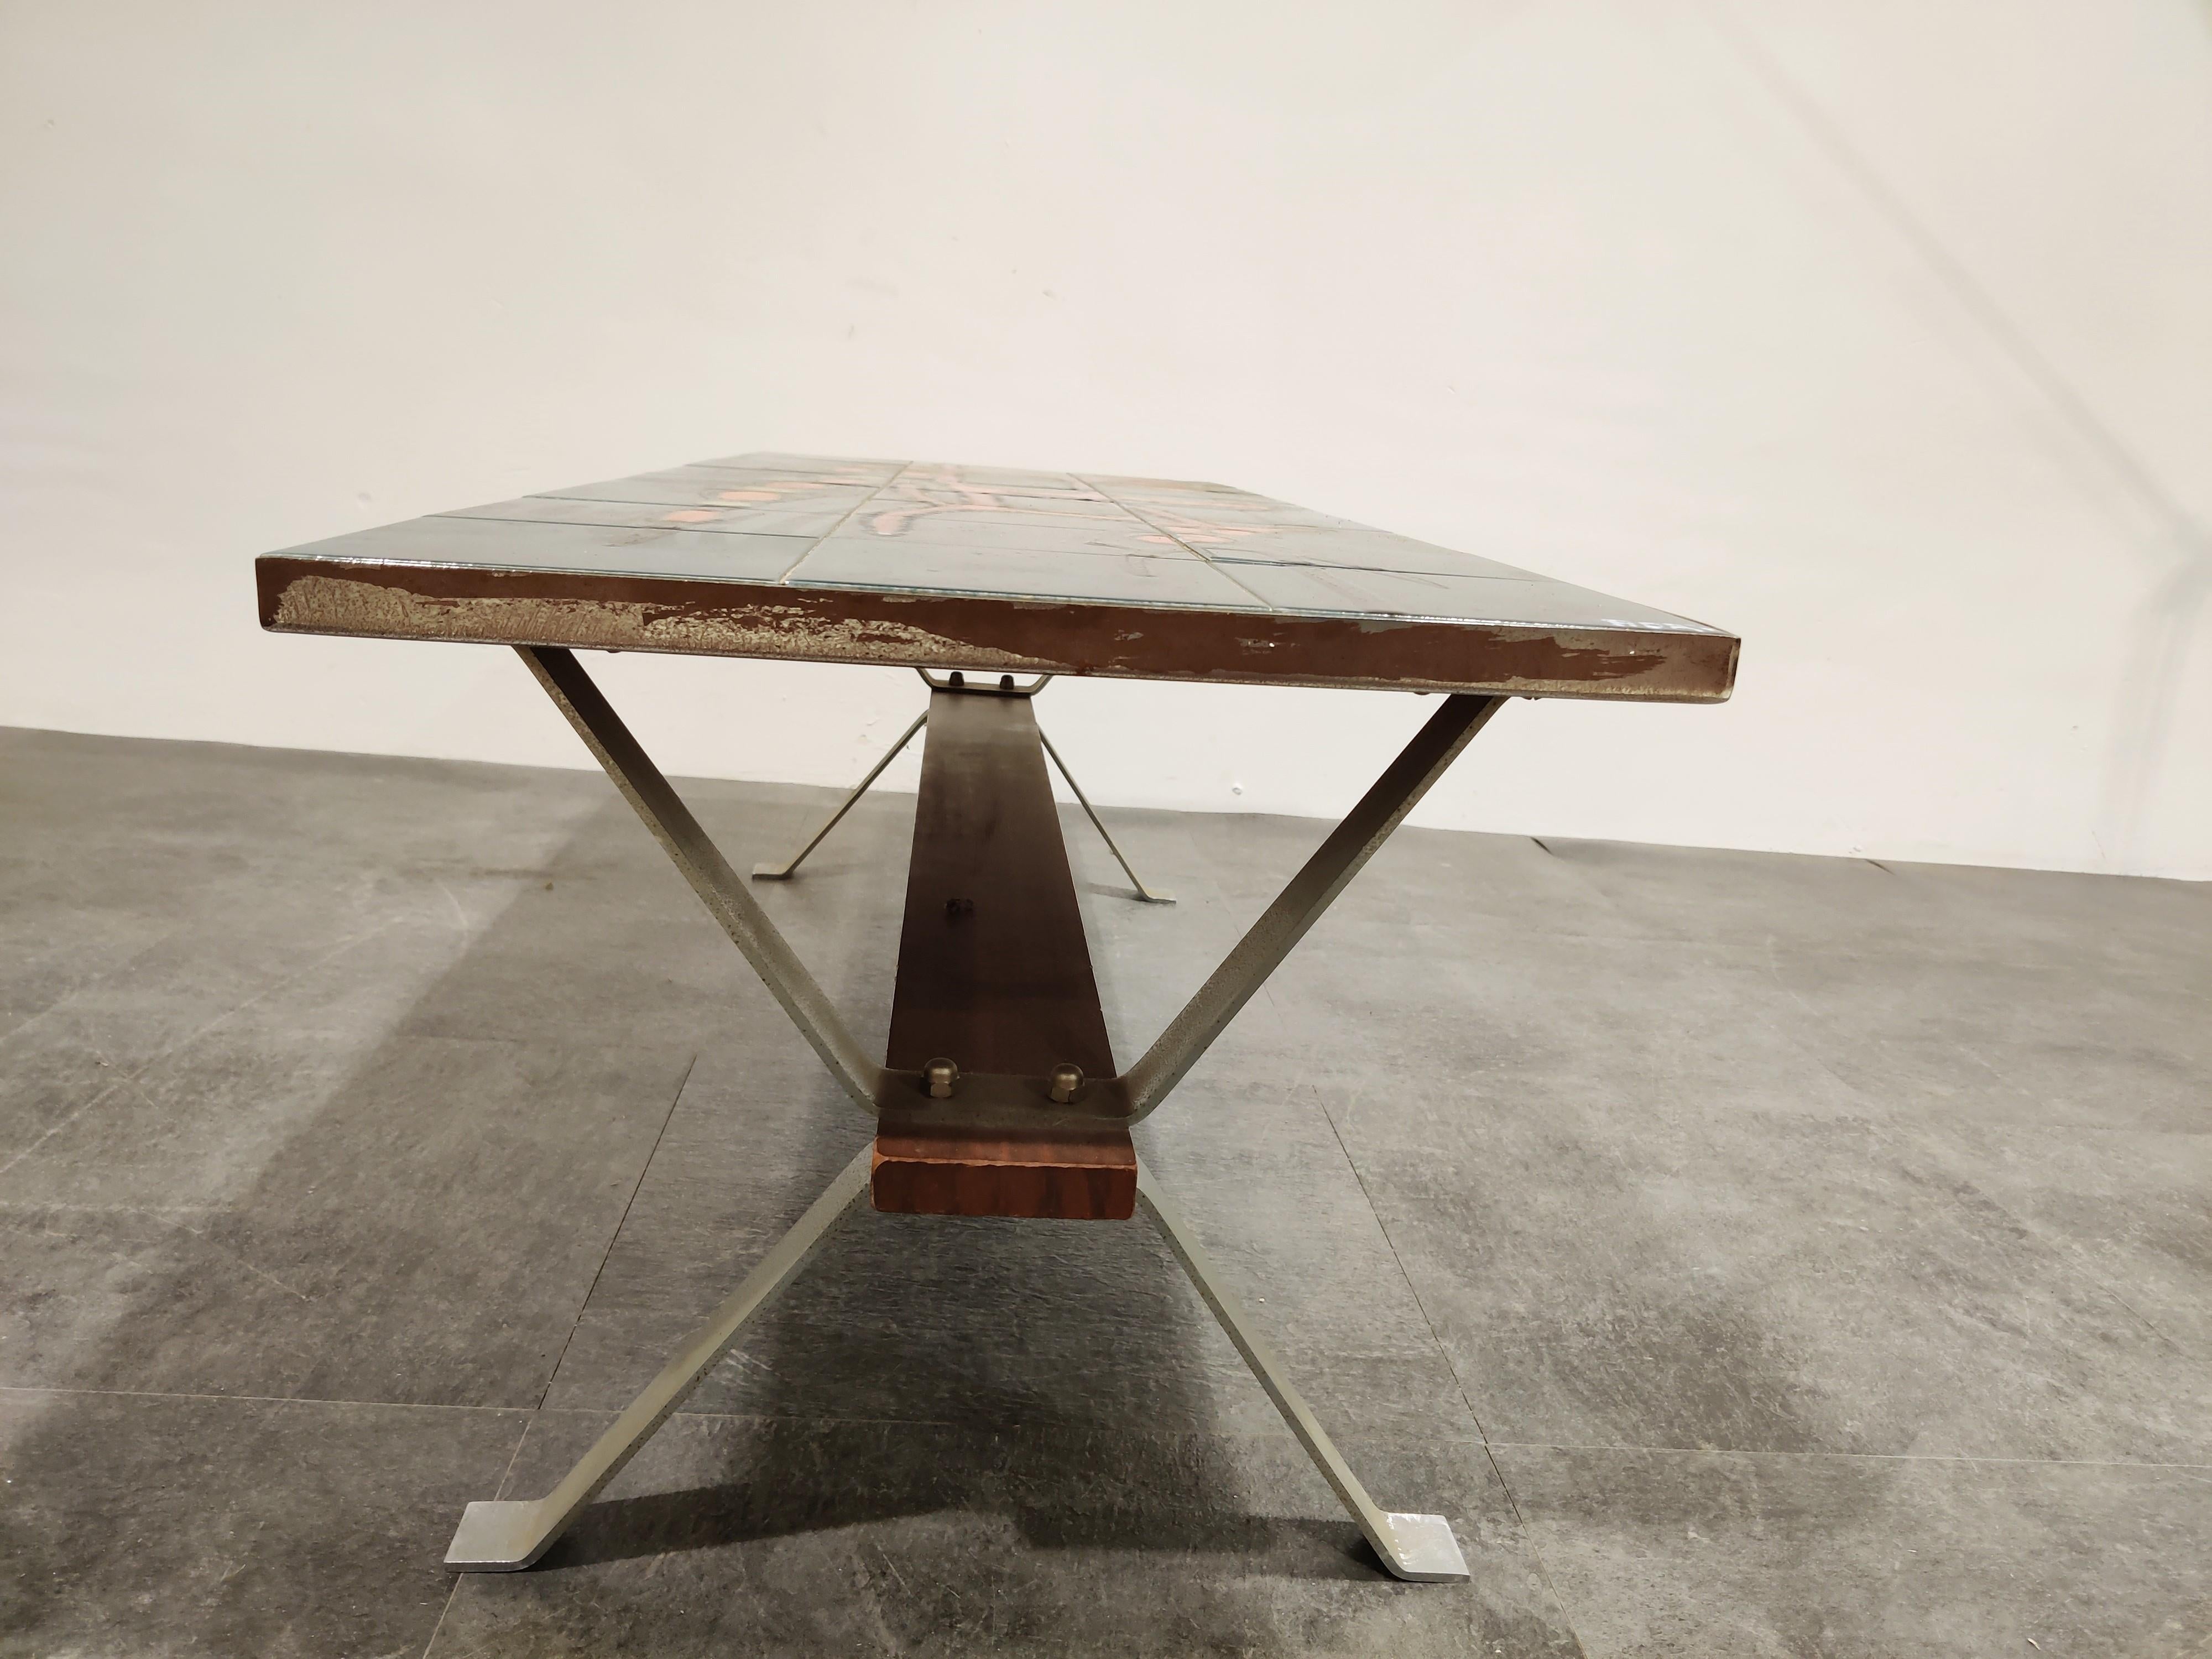 Stricking midcentury coffee table with a ceramic tiled top and a teak/chrome frame.

The table is signed by Adri.

Attractive colors and modernist design.

Untouched condition with rust marks on the side of the coffee table. Tiles are in good